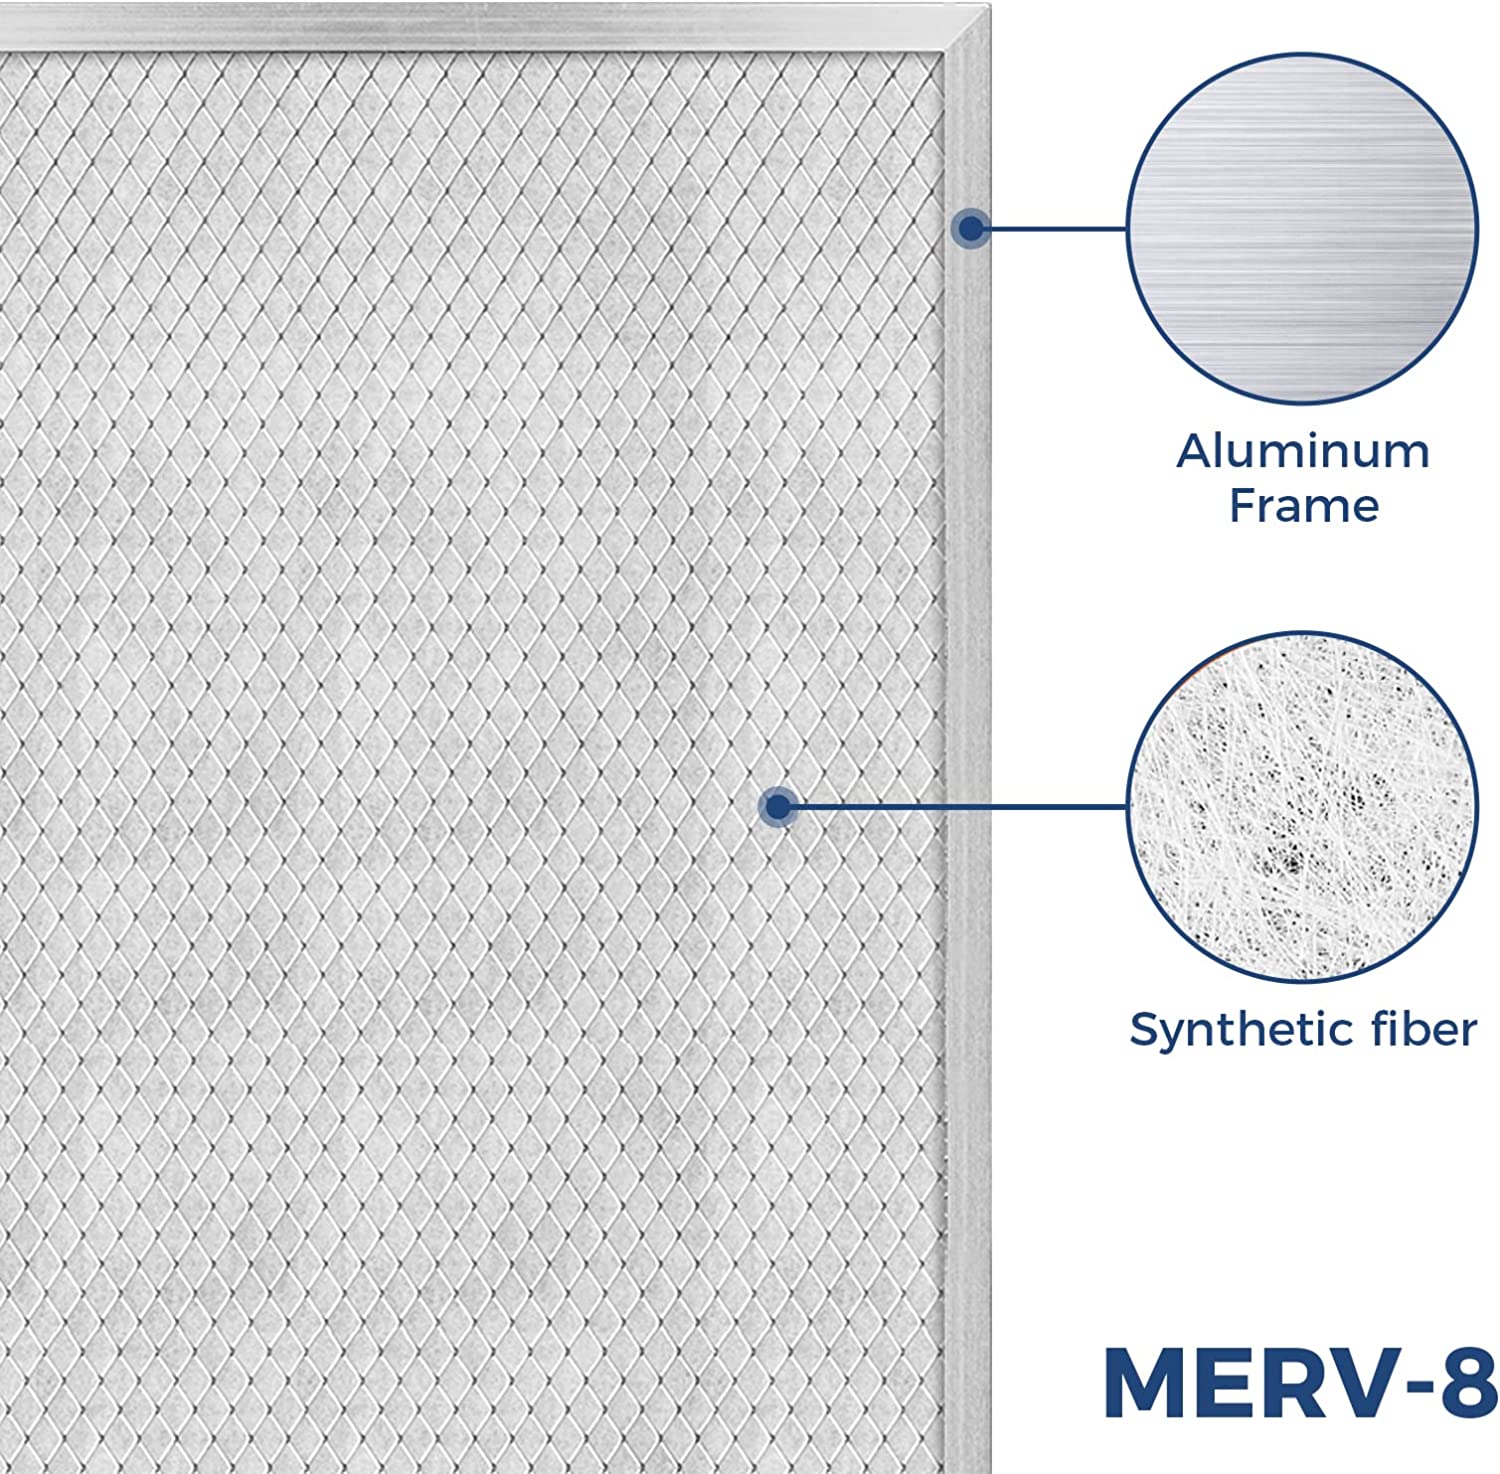 AlorAir MERV-8 Air Filter Capturing Large Airborne Particles for Healthier Living Spaces. Aluminum Frame. Synthetic Fiber. 